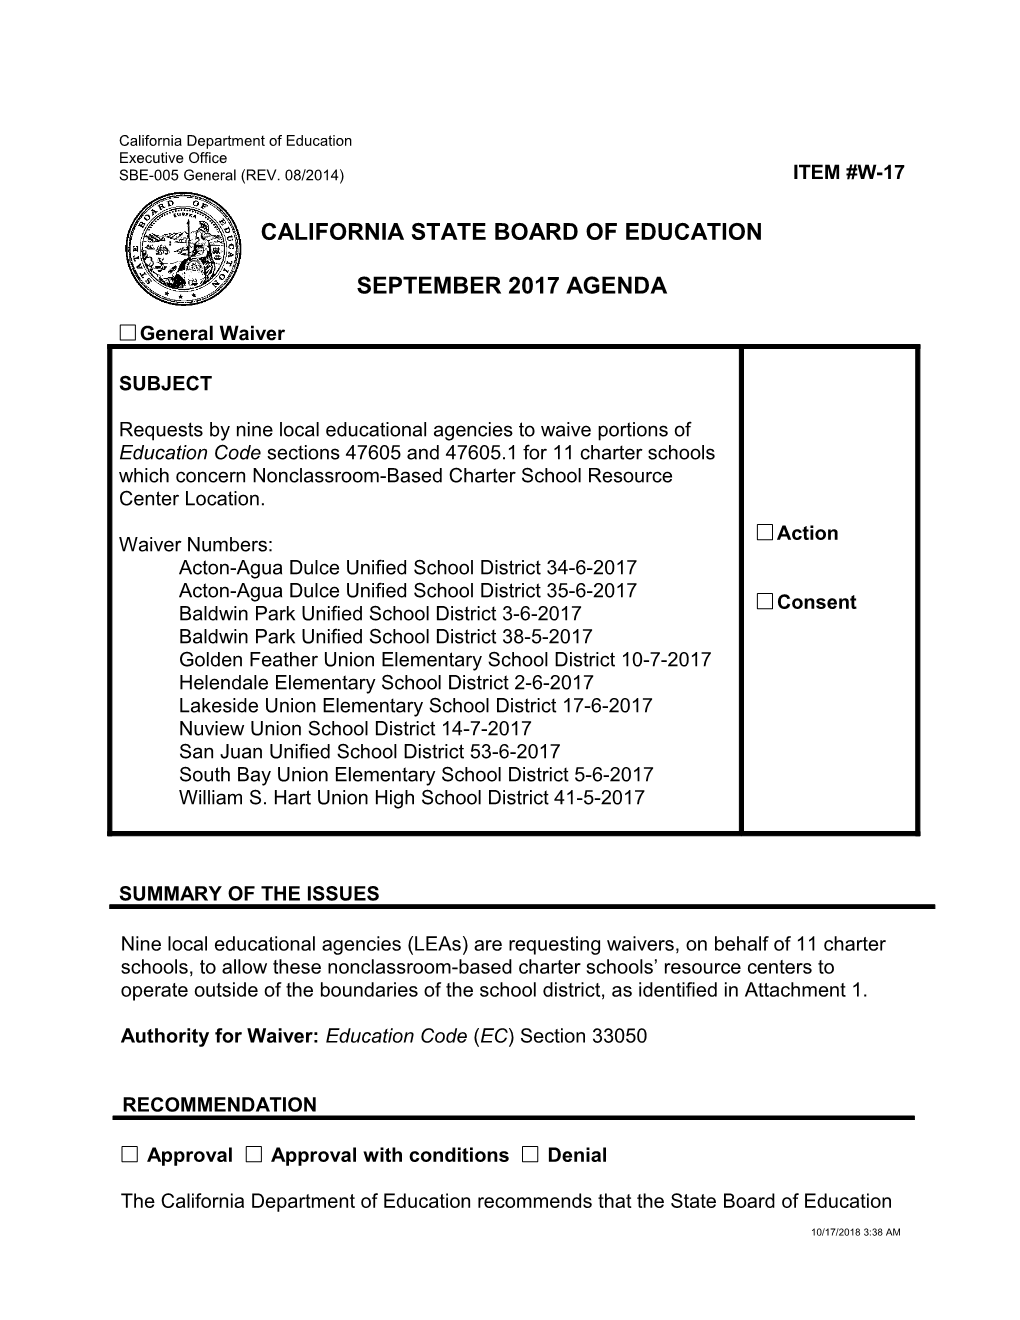 September 2017 Waiver Item W-17 - Meeting Agendas (CA State Board of Education)